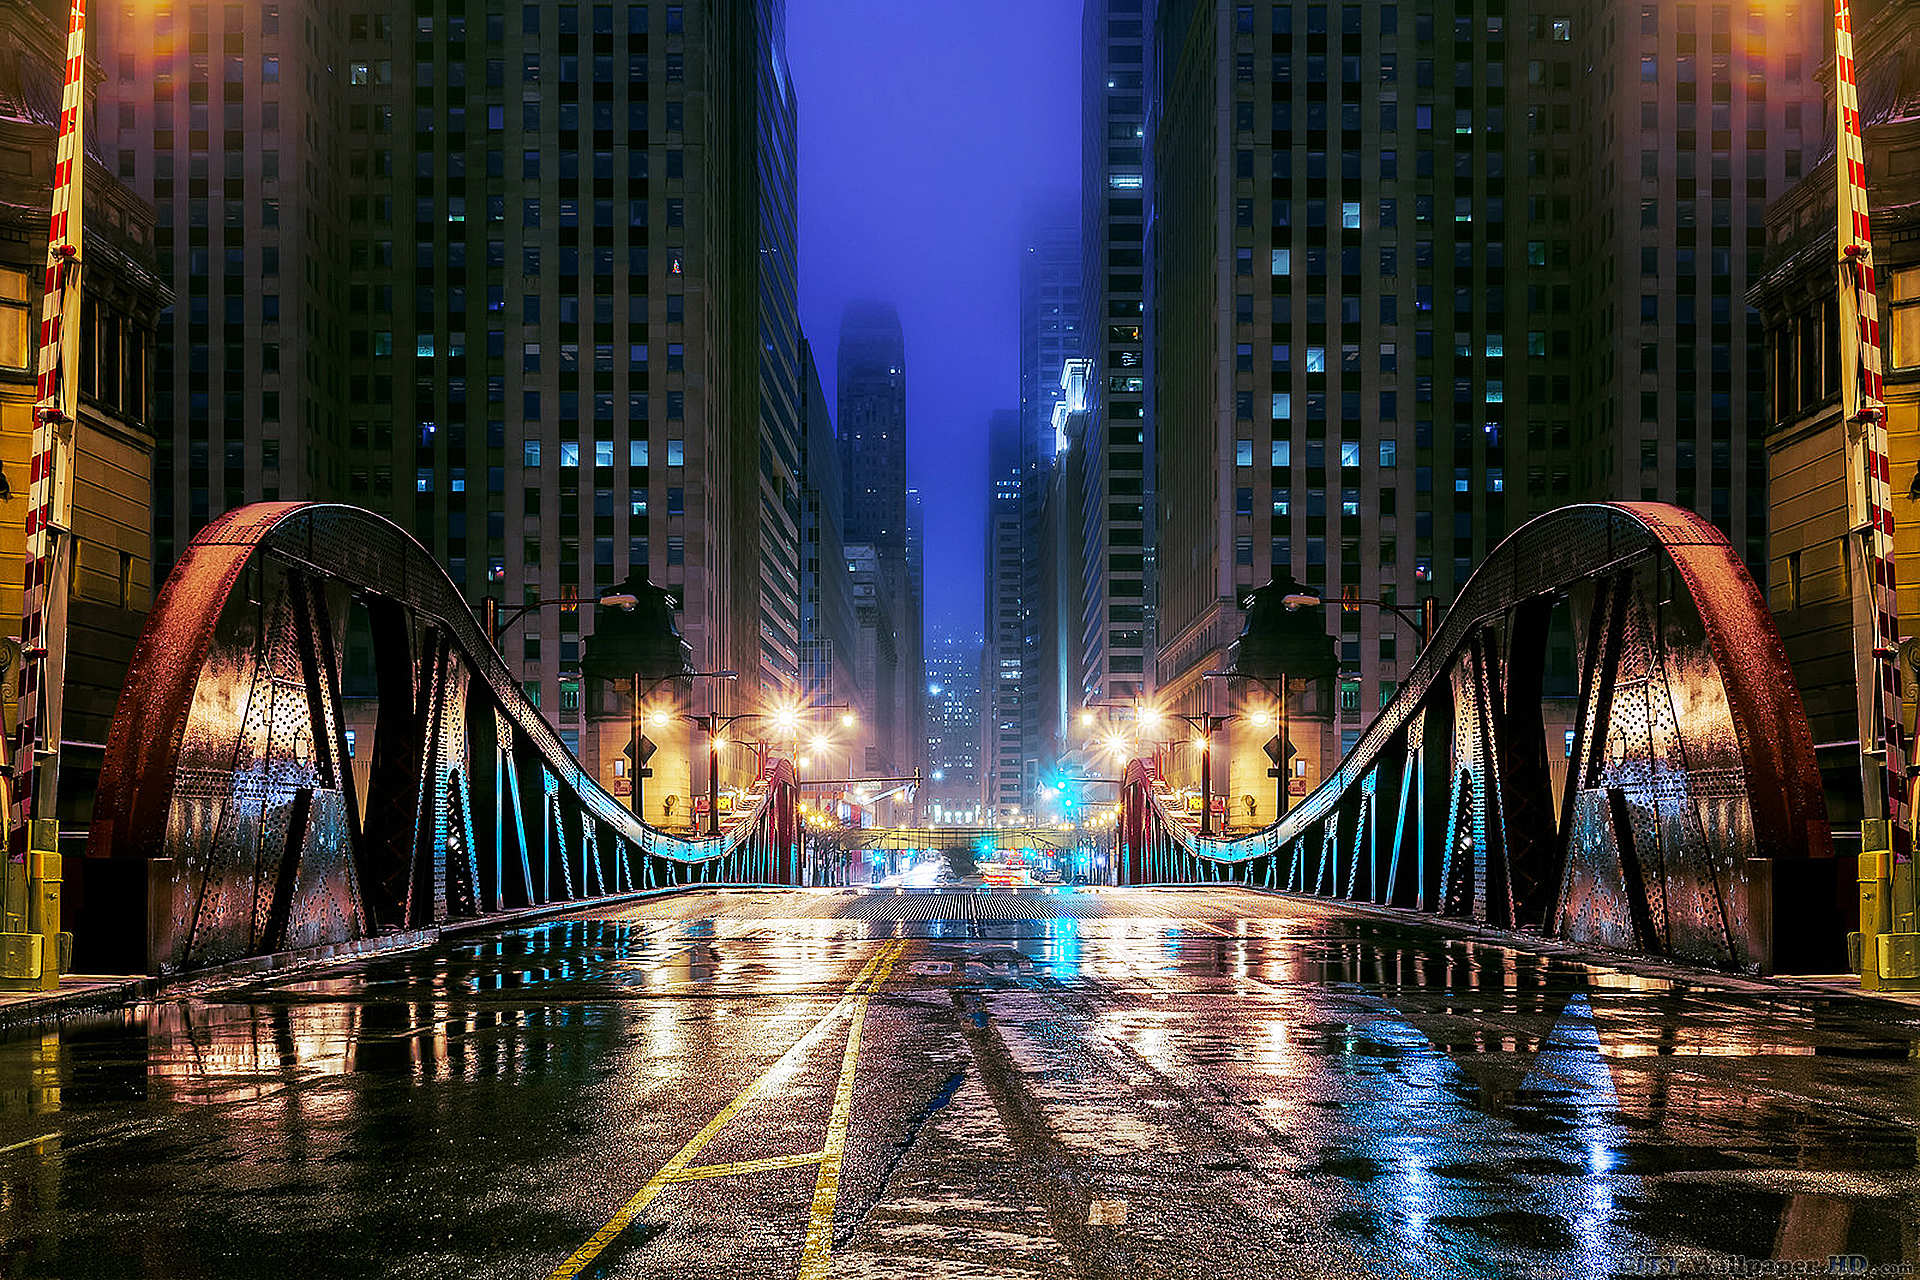 Chicago wallpaper. Widescreen image cities in the world to your